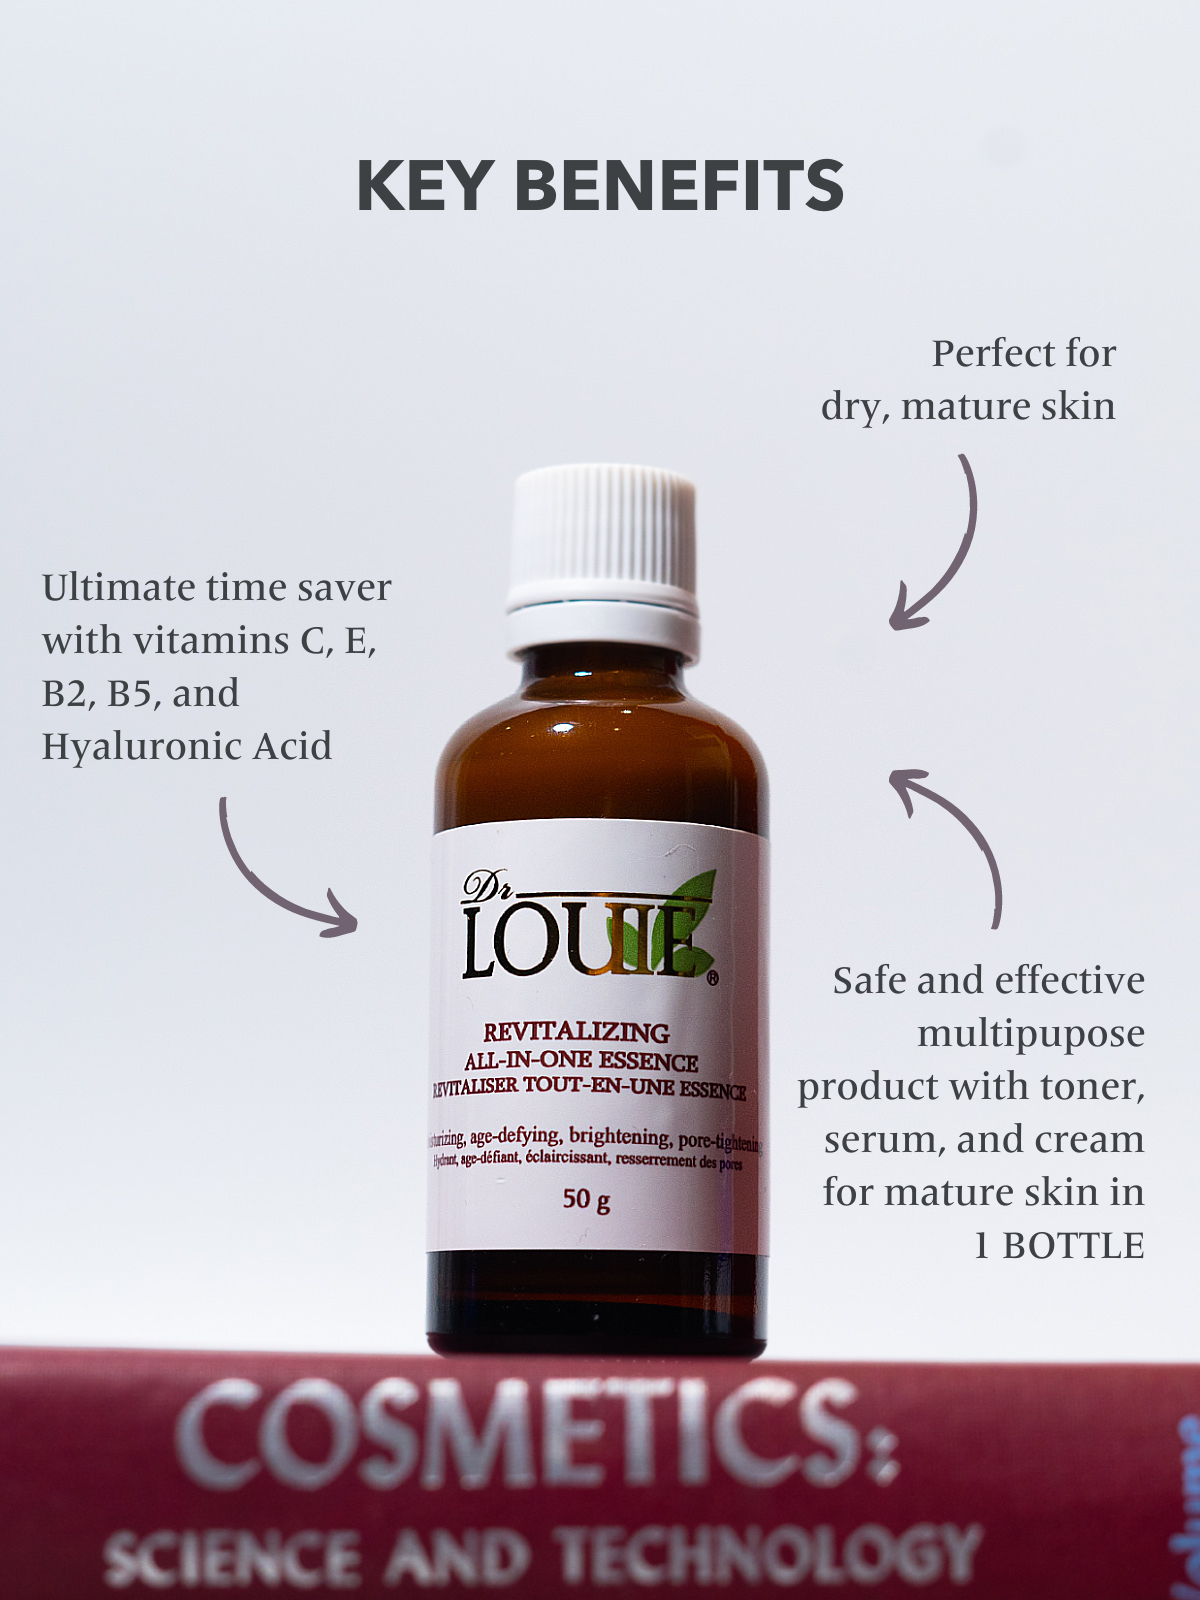 Revitalizing All-in-One Essence